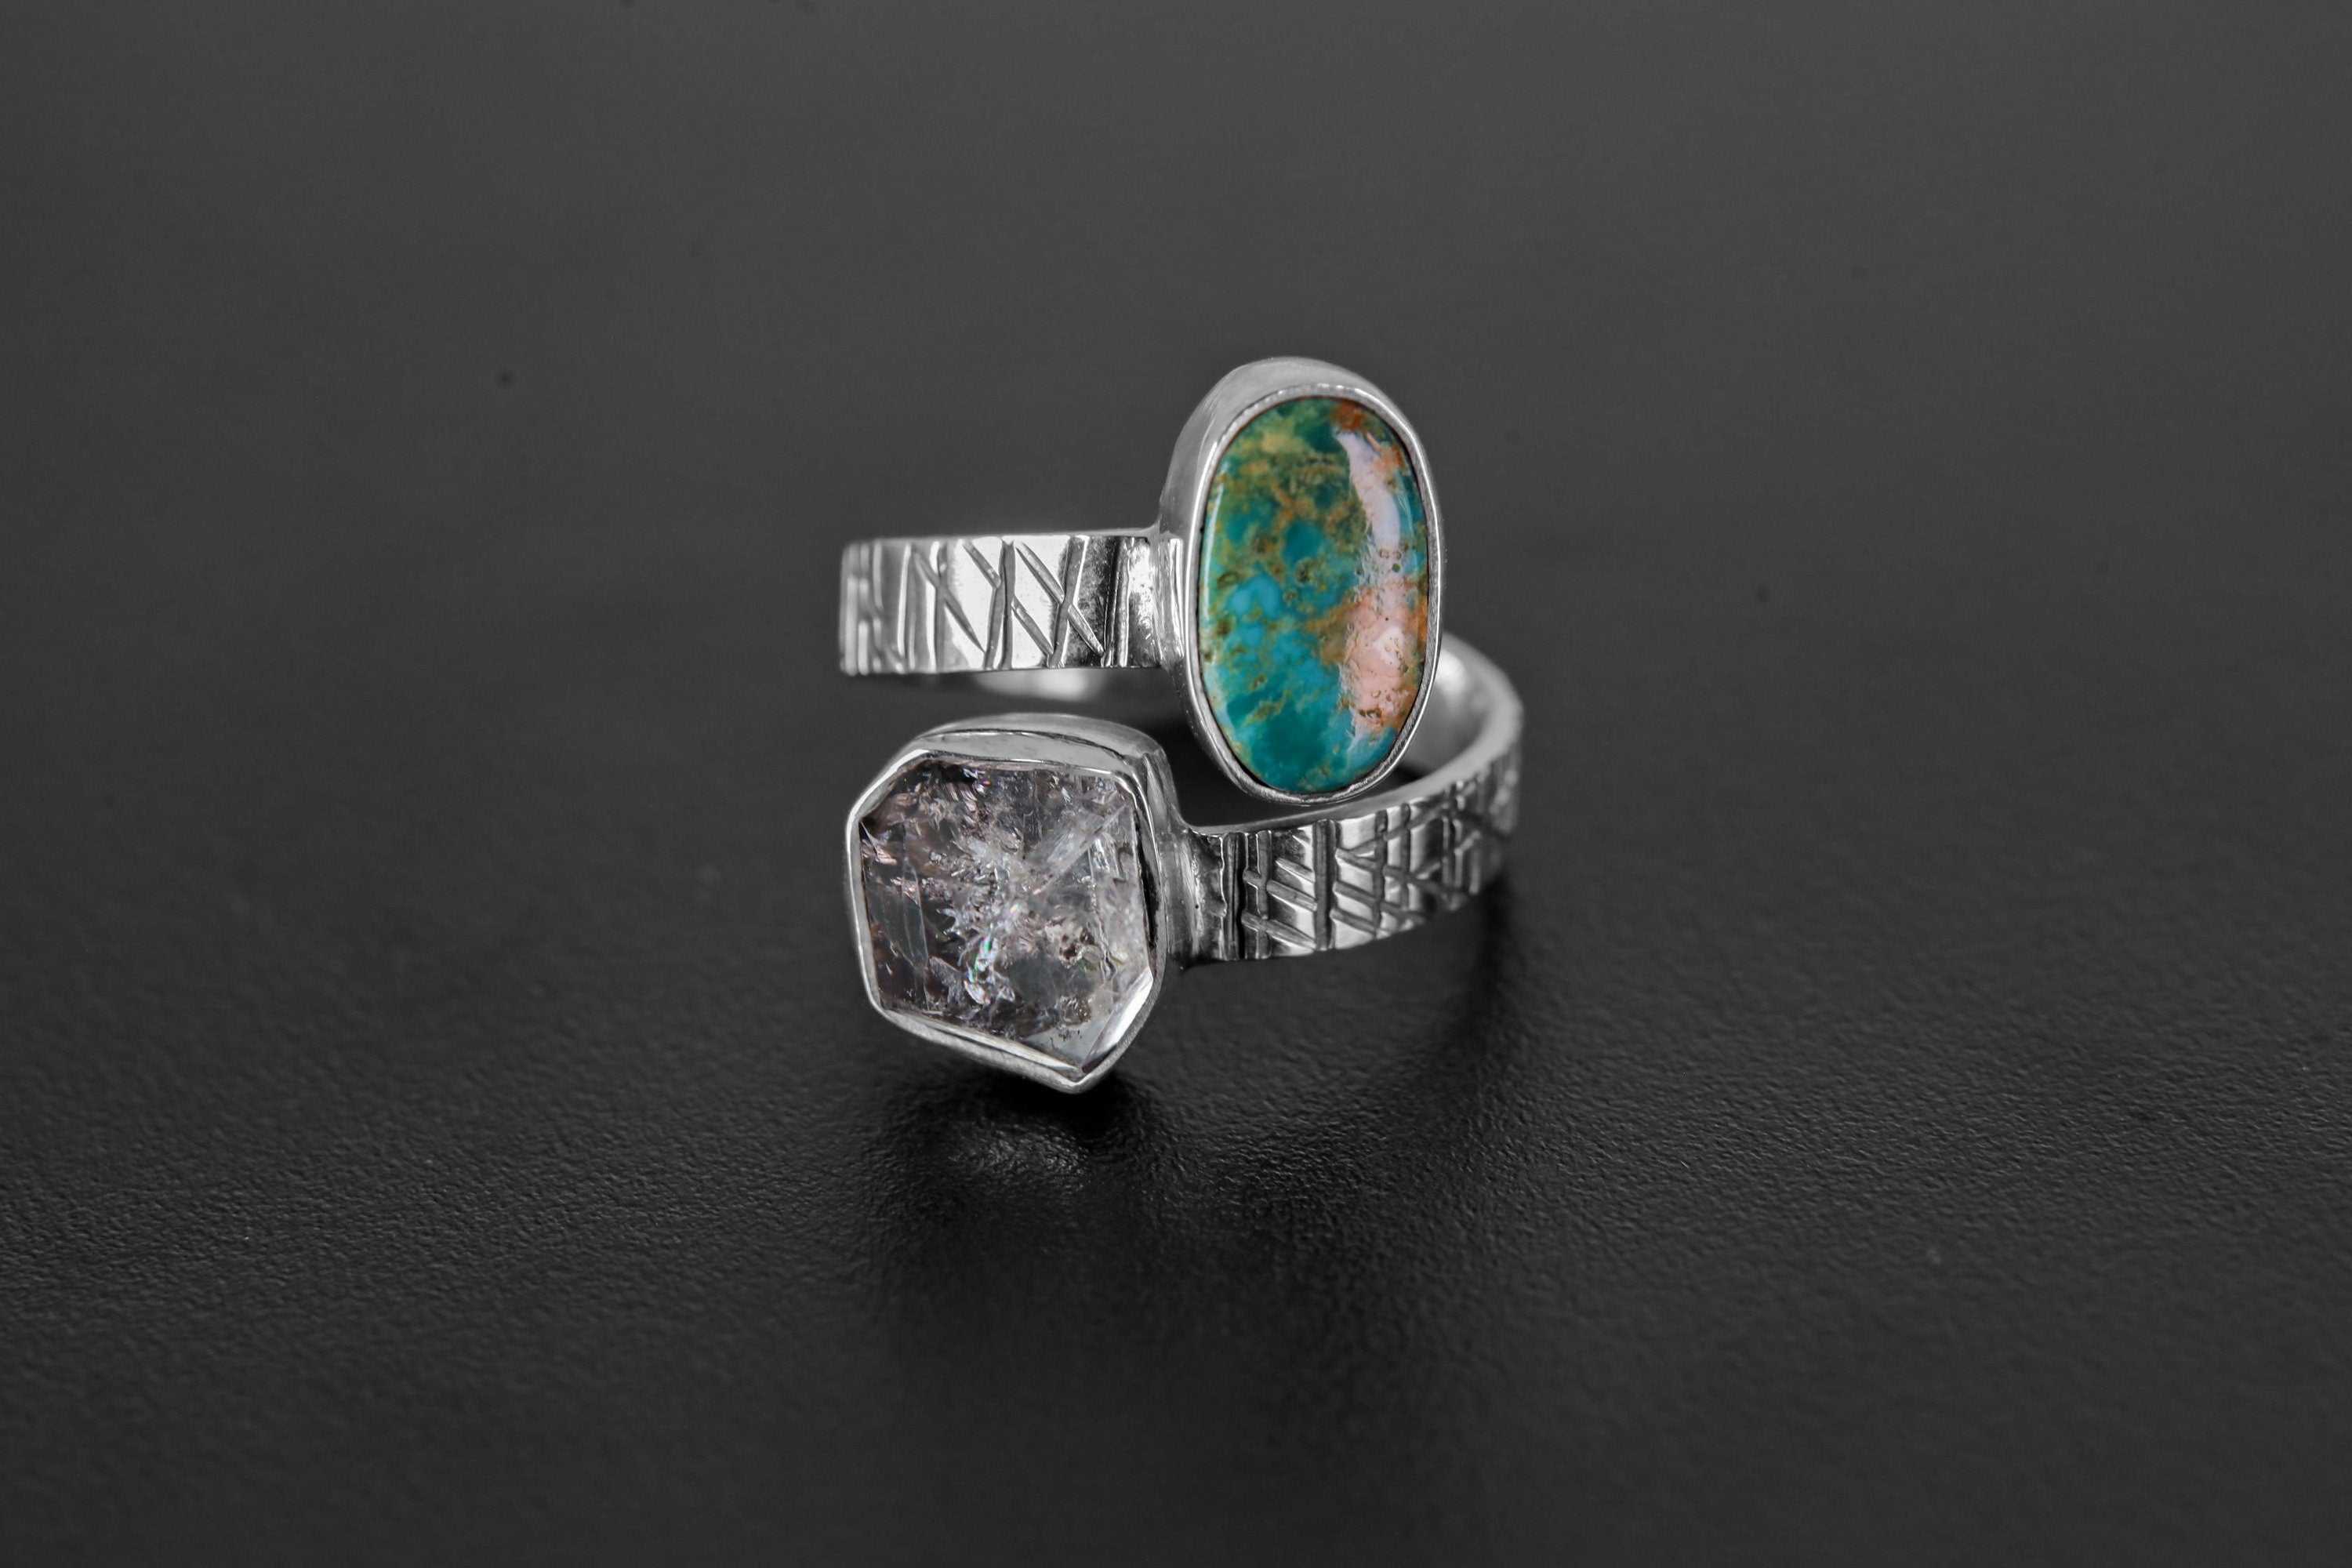 Herkimer diamond sleeping Beauty turquoise - 925 Sterling Silver - Double Stone - Textured, High Shine Polish - Adjustable Open Ring Band